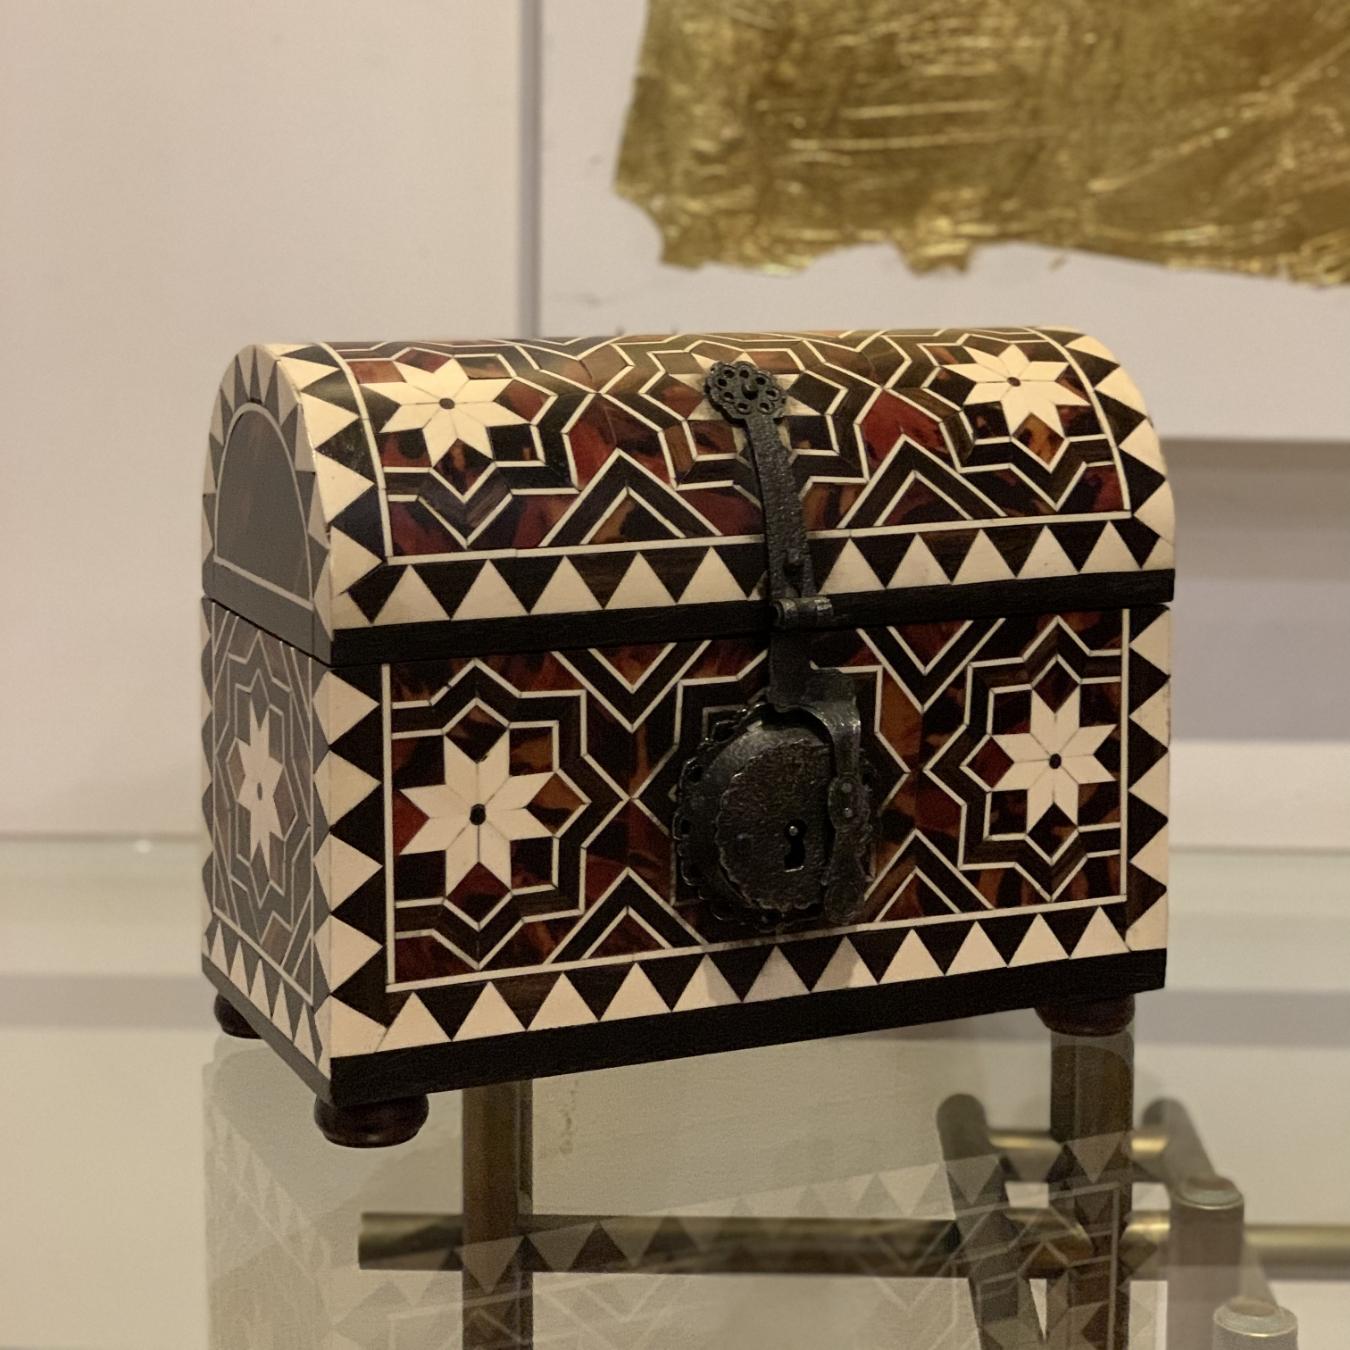 Mudejar Small Coffer with Bone Inlays, Faux Tortoiseshell and an Iron Hardware In New Condition For Sale In Bosques de las Lomas, MX